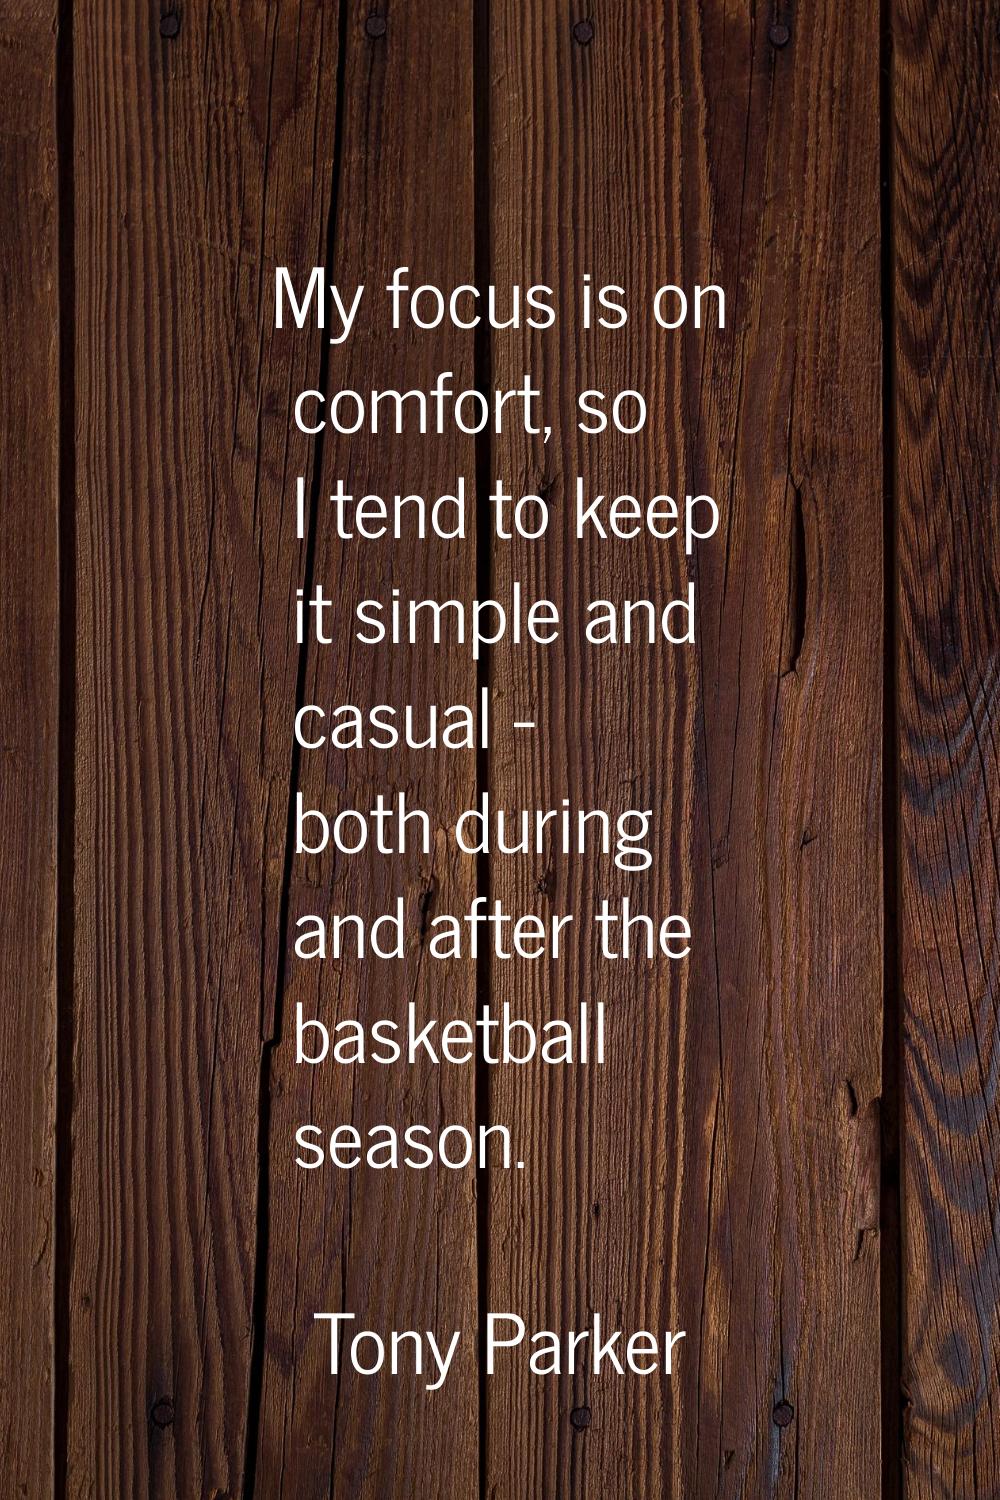 My focus is on comfort, so I tend to keep it simple and casual - both during and after the basketba